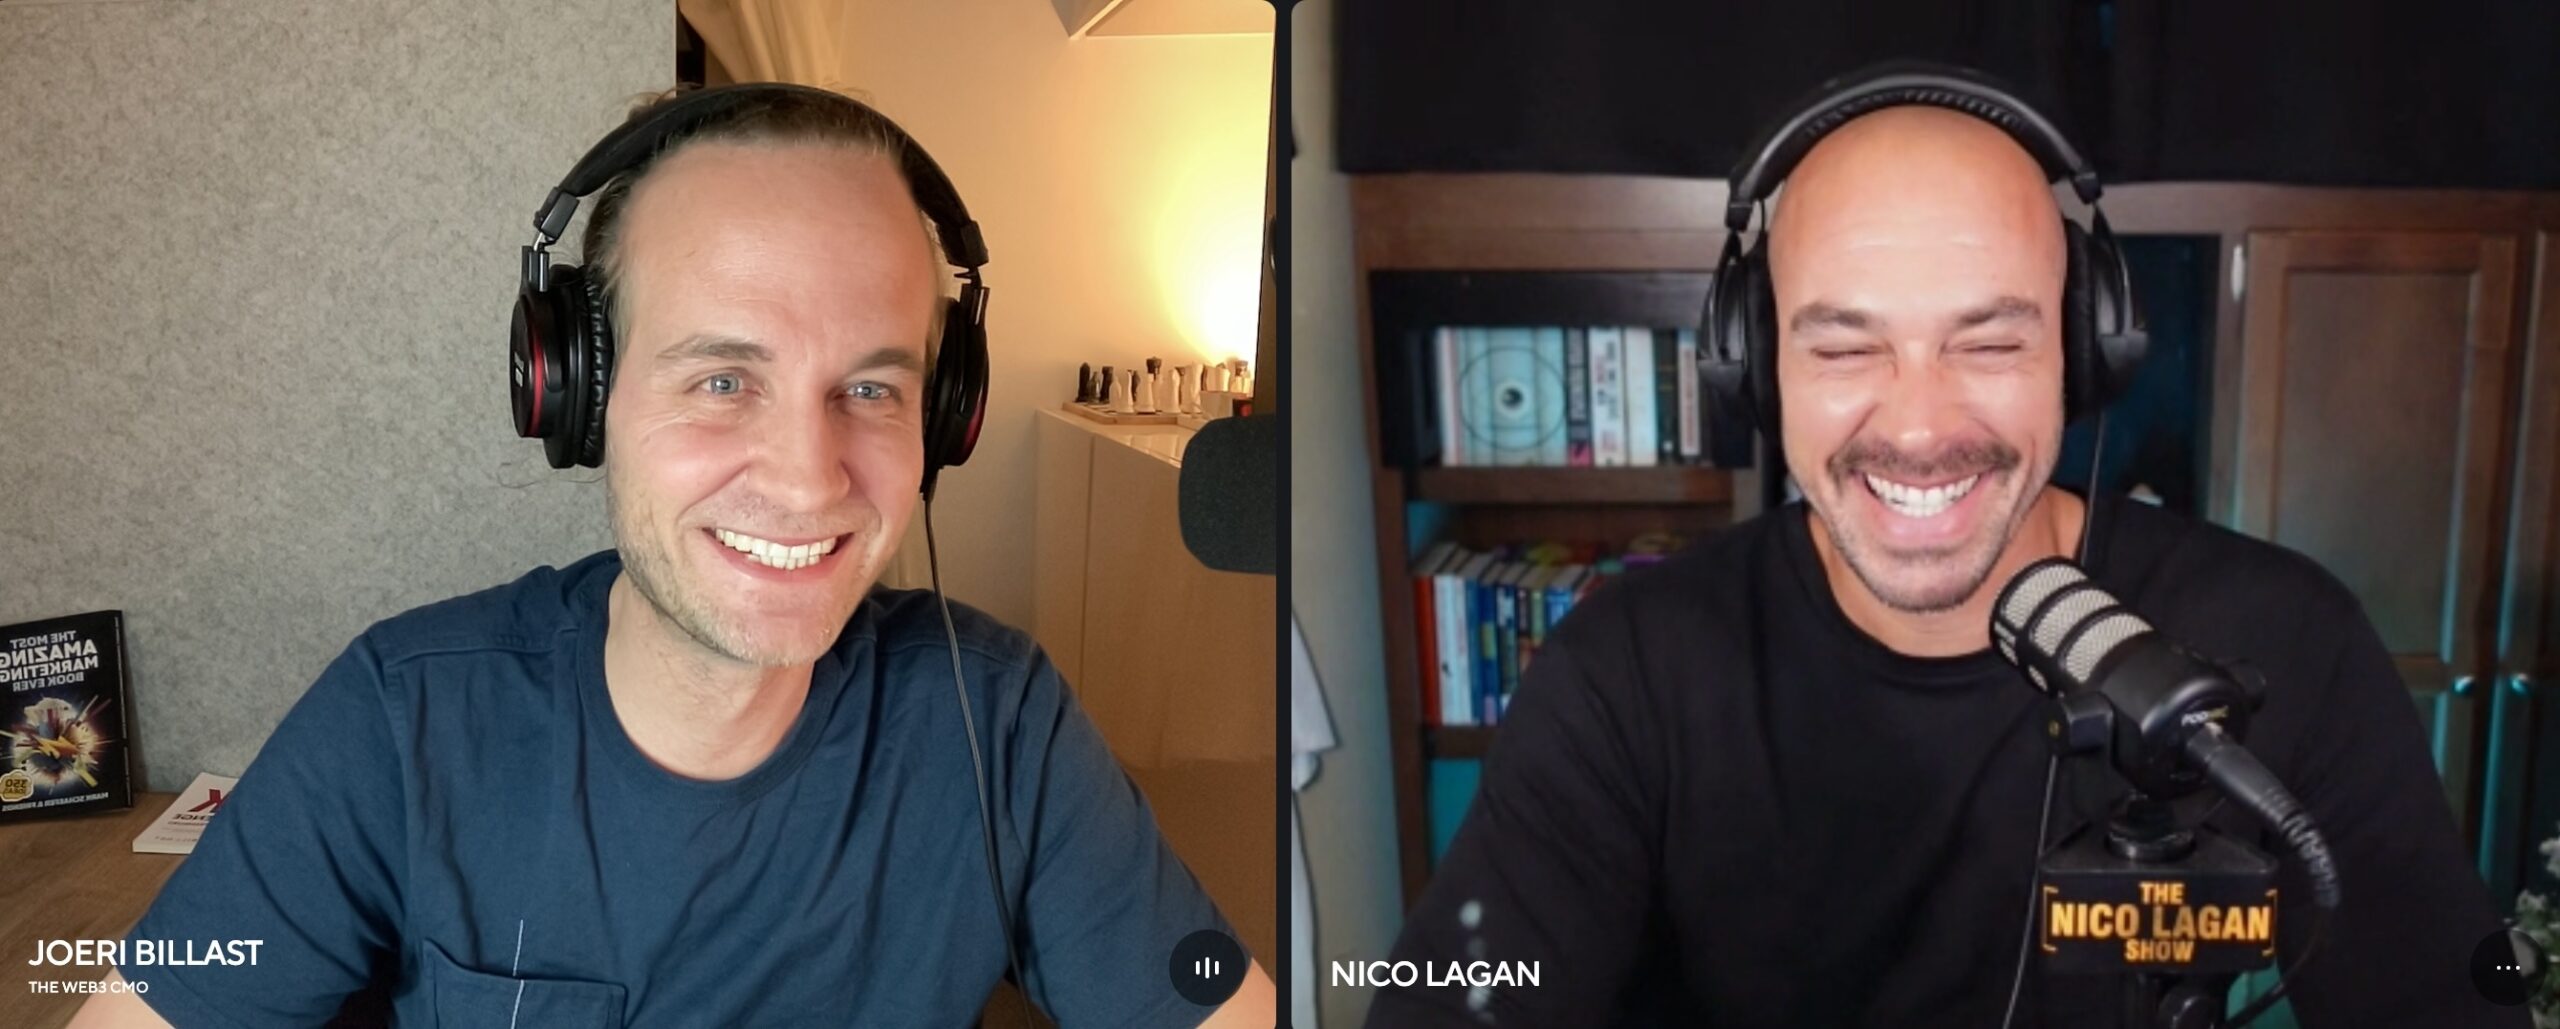 The Art of AI-Infused Content and Sales Wisdom with Nico Lagan | S3 E41